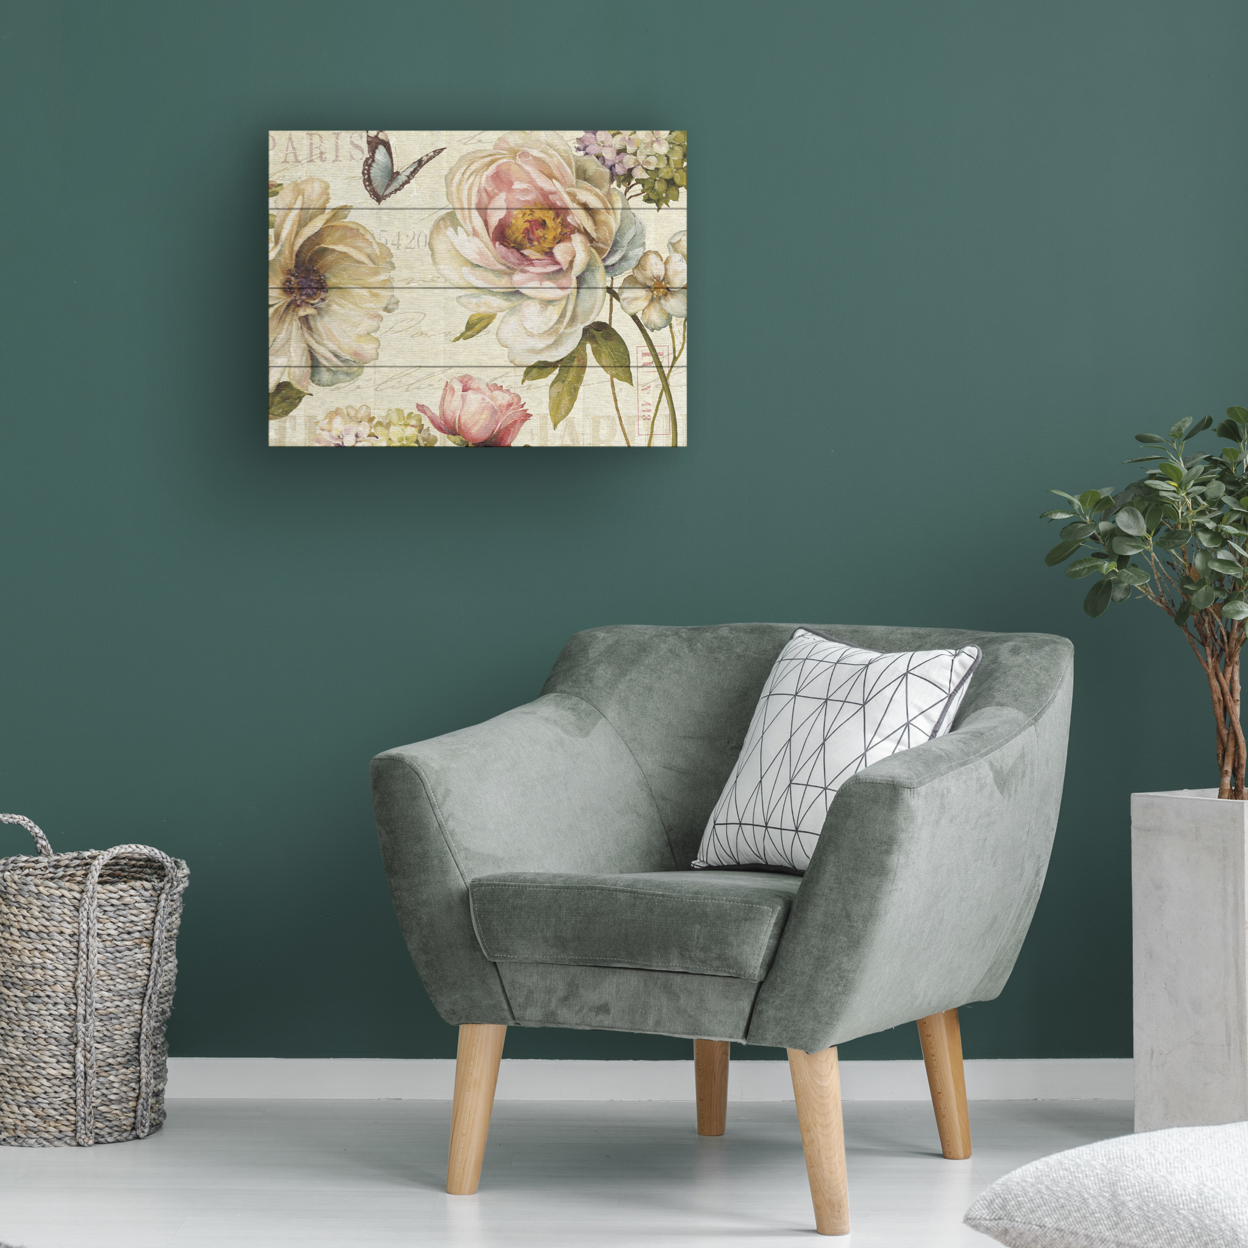 Wall Art 12 X 16 Inches Titled Marche De Fleurs IV Ready To Hang Printed On Wooden Planks